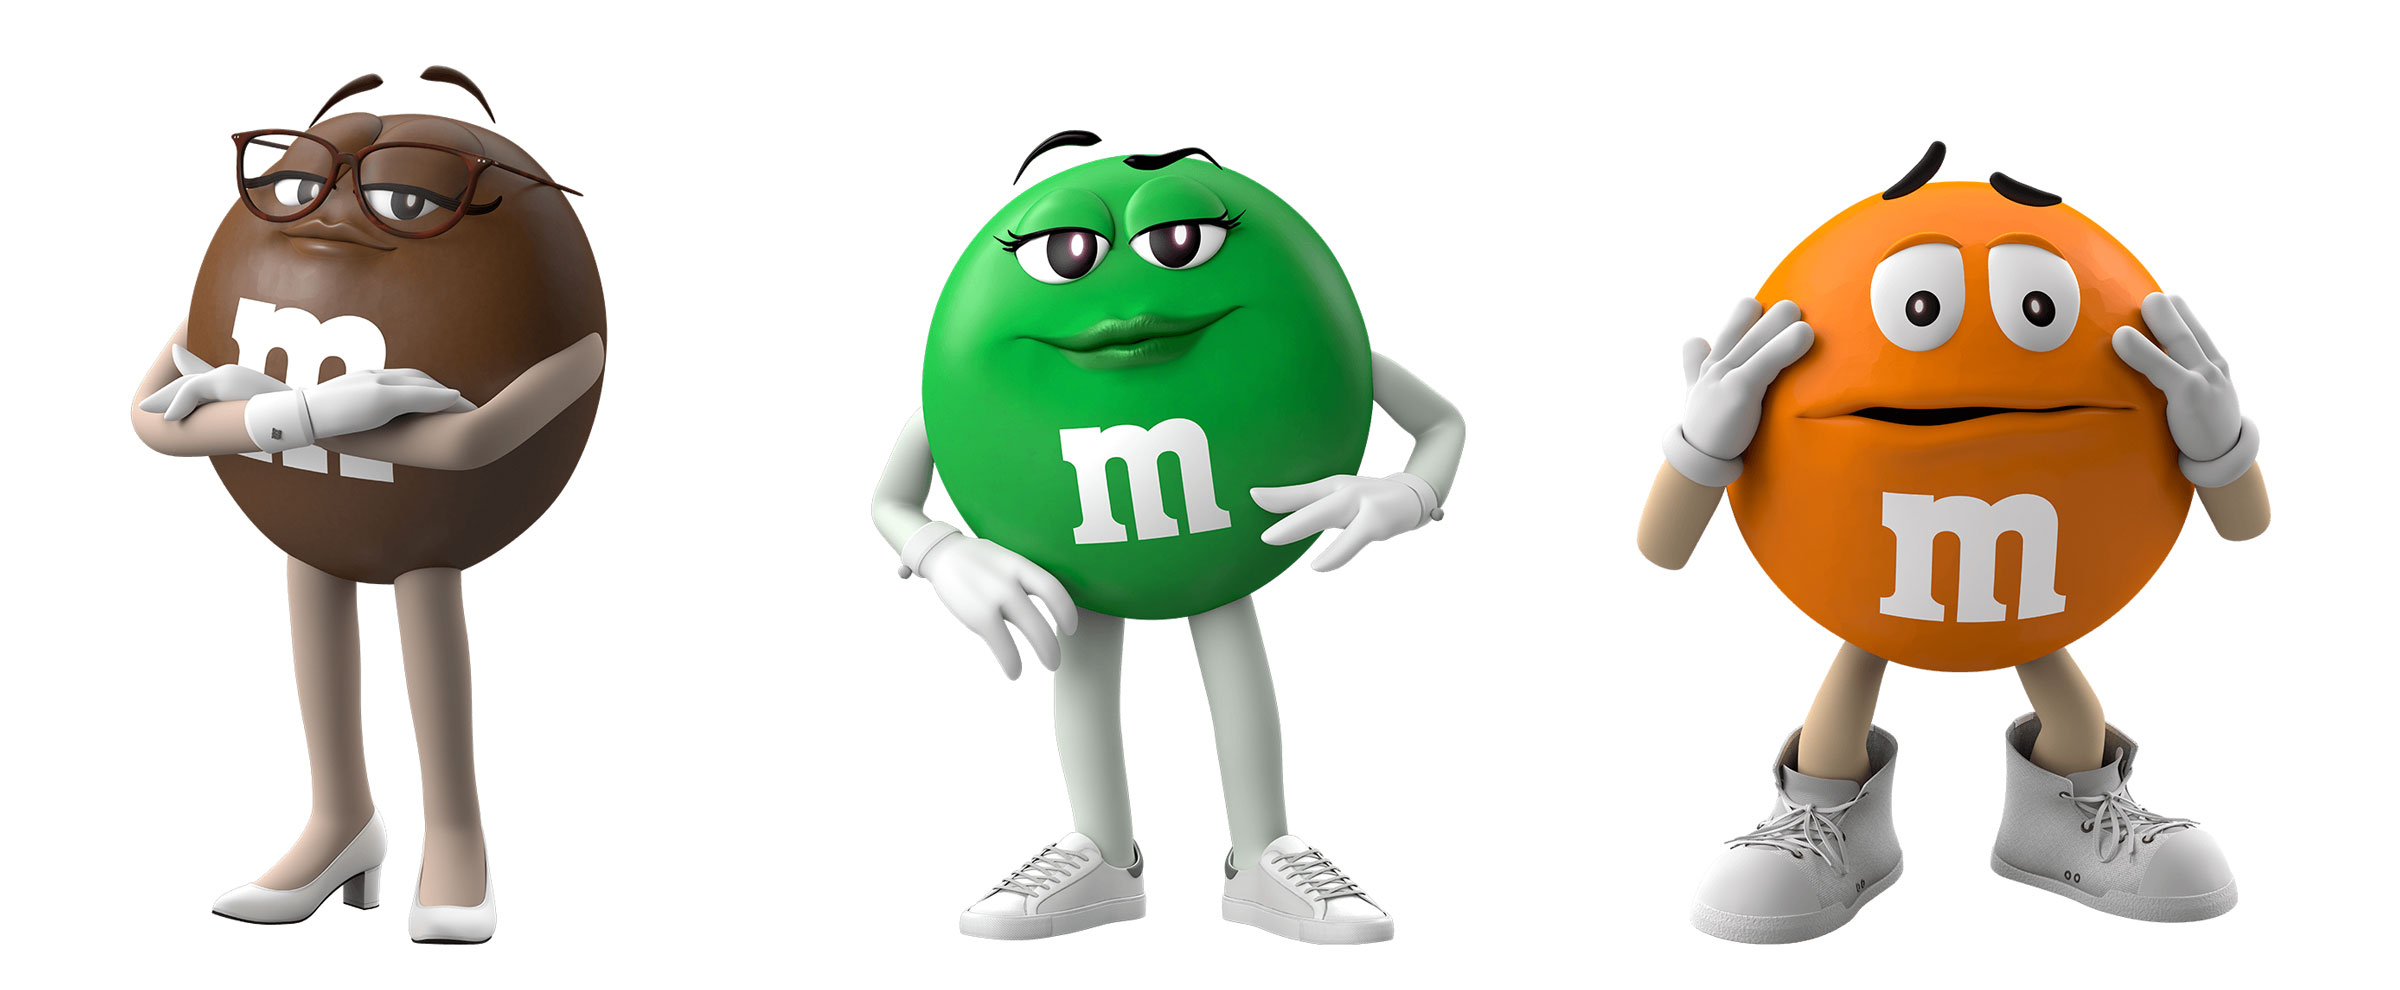 M&M's became the focus of a partisan backlash after the brand made a number of stylistic tweaks to its cast of “spokescandies” last year. (Courtesy M&M’s)